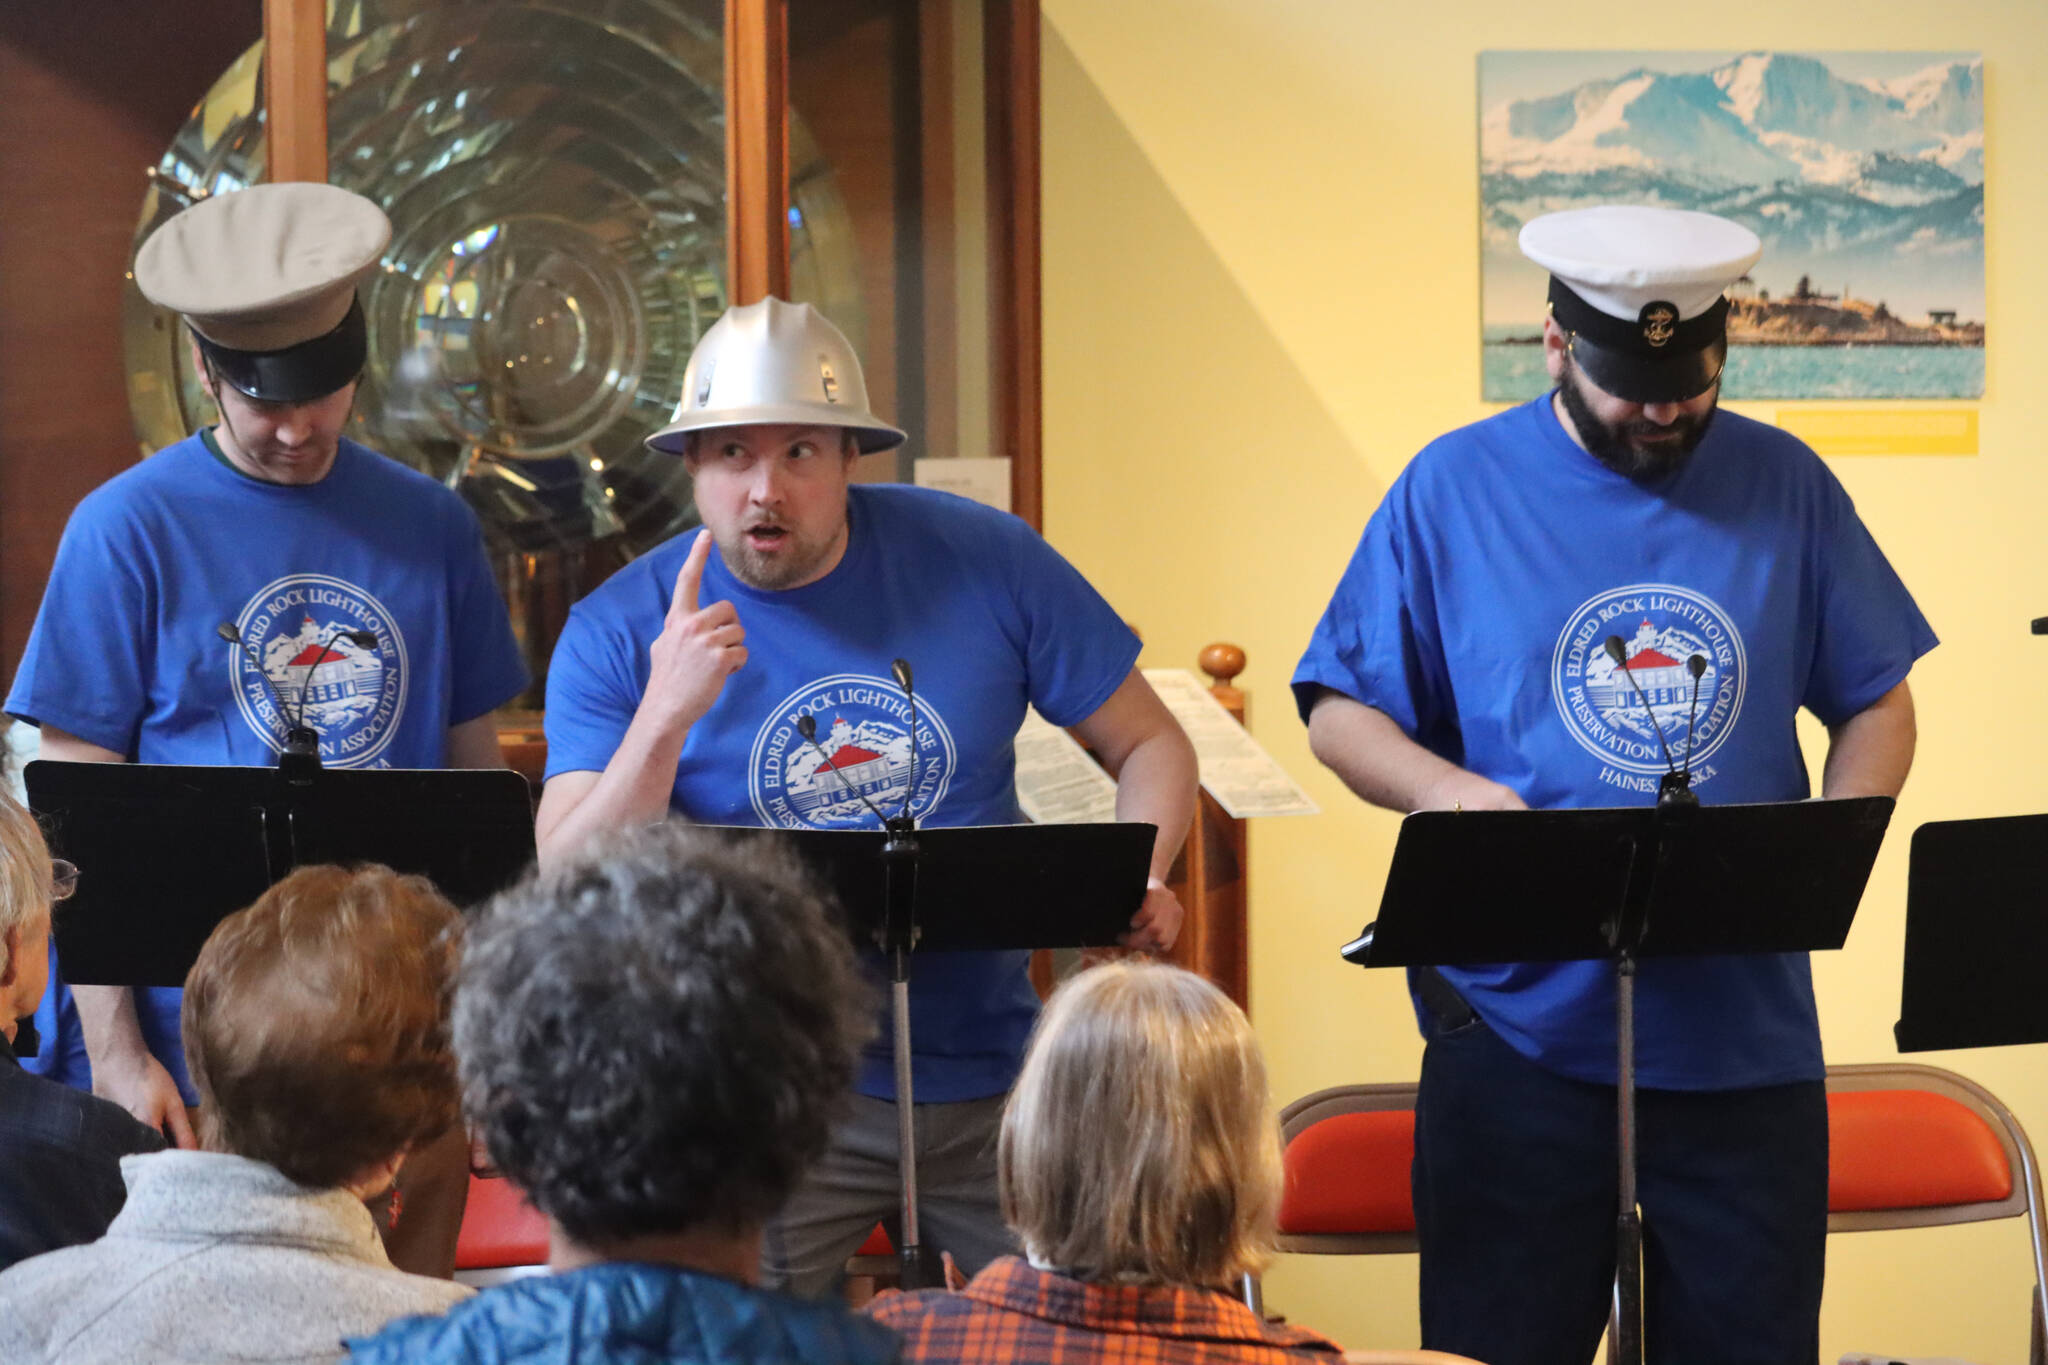 Kyle Clayton, Ryan Staska and Brandon Wilks, all members of the Lynn Canal Community Players, perform a staged reading of the play, "The Strange Fate of the Clara Nevada" on Sunday at the Haines Sheldon Museum to commemorate the 125th anniversary of the ship's sinking in 1898. (Jonson Kuhn / Juneau Empire)